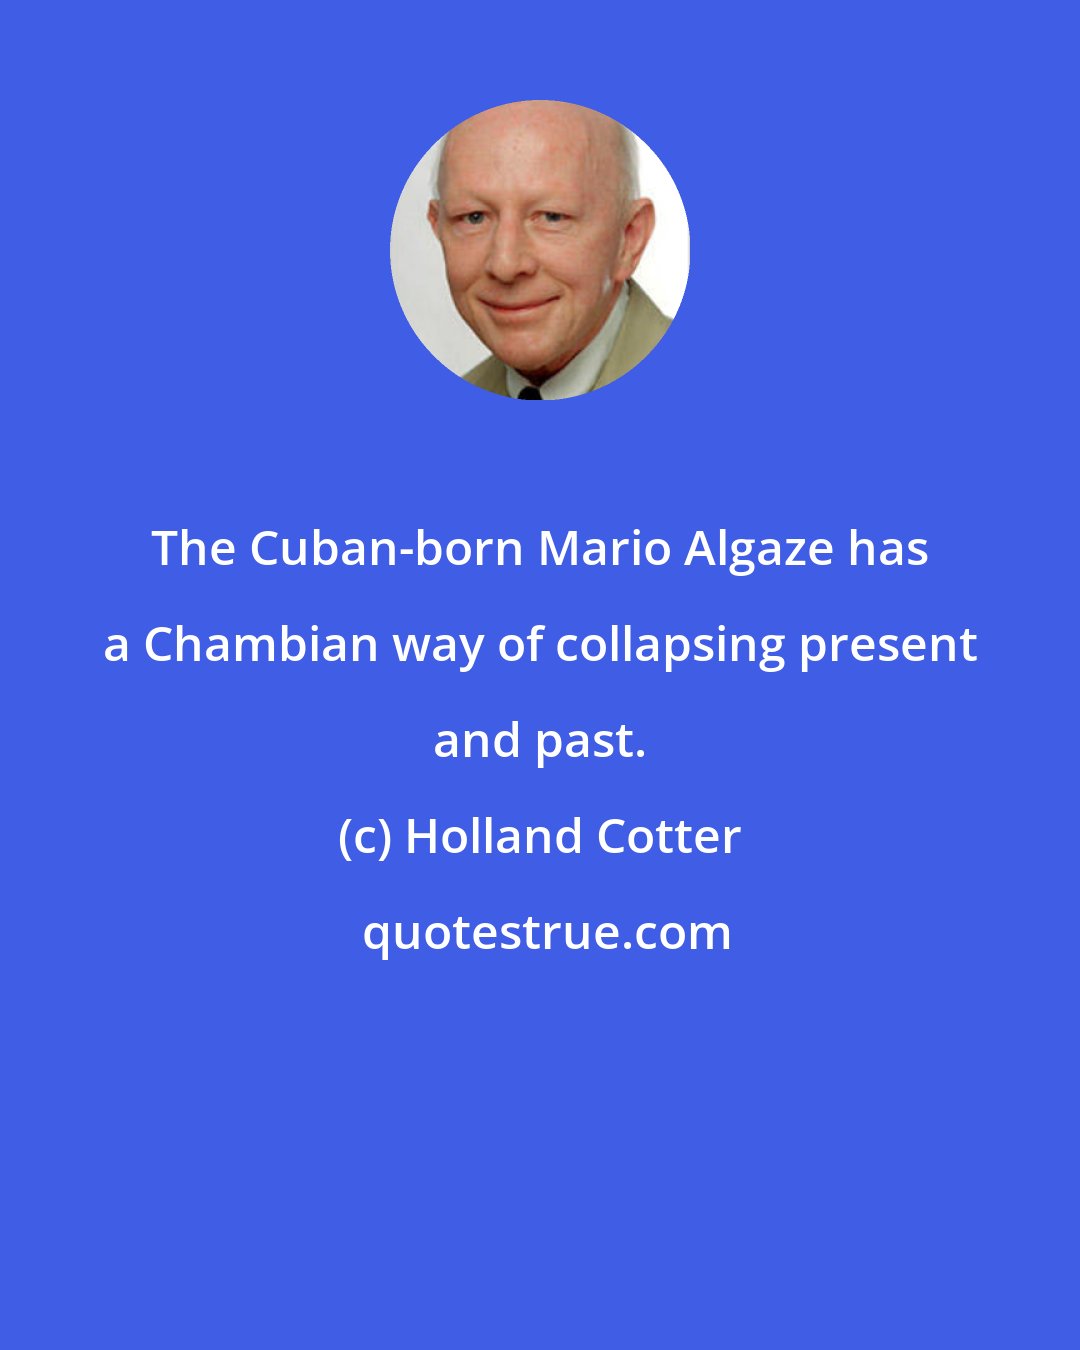 Holland Cotter: The Cuban-born Mario Algaze has a Chambian way of collapsing present and past.